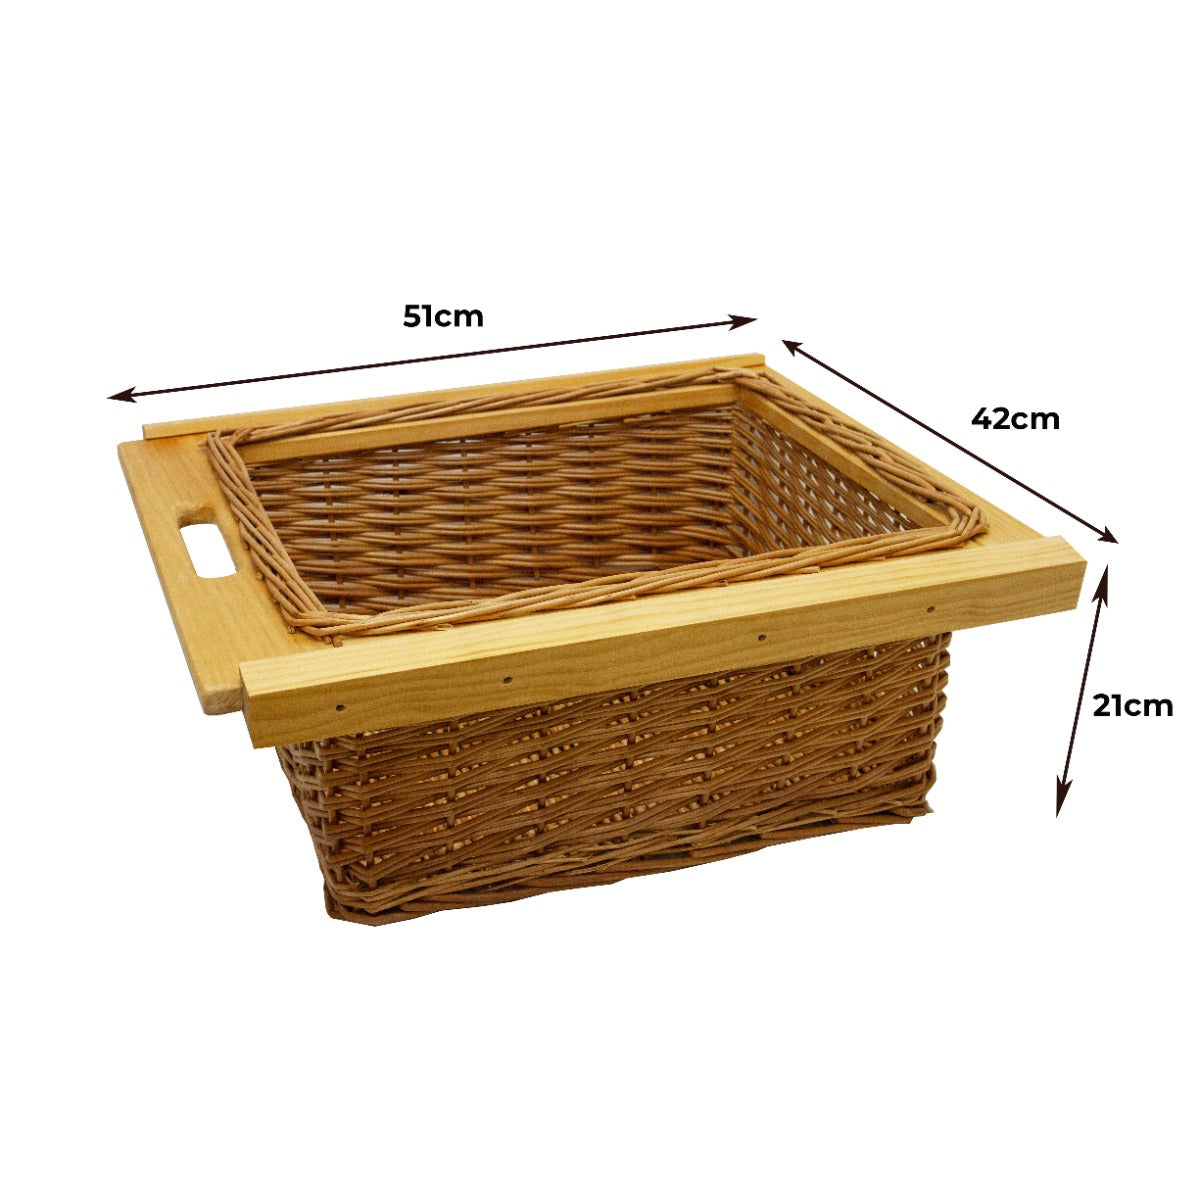 2 x Pull Out Wicker Kitchen Baskets 500mm - Used - Very Good